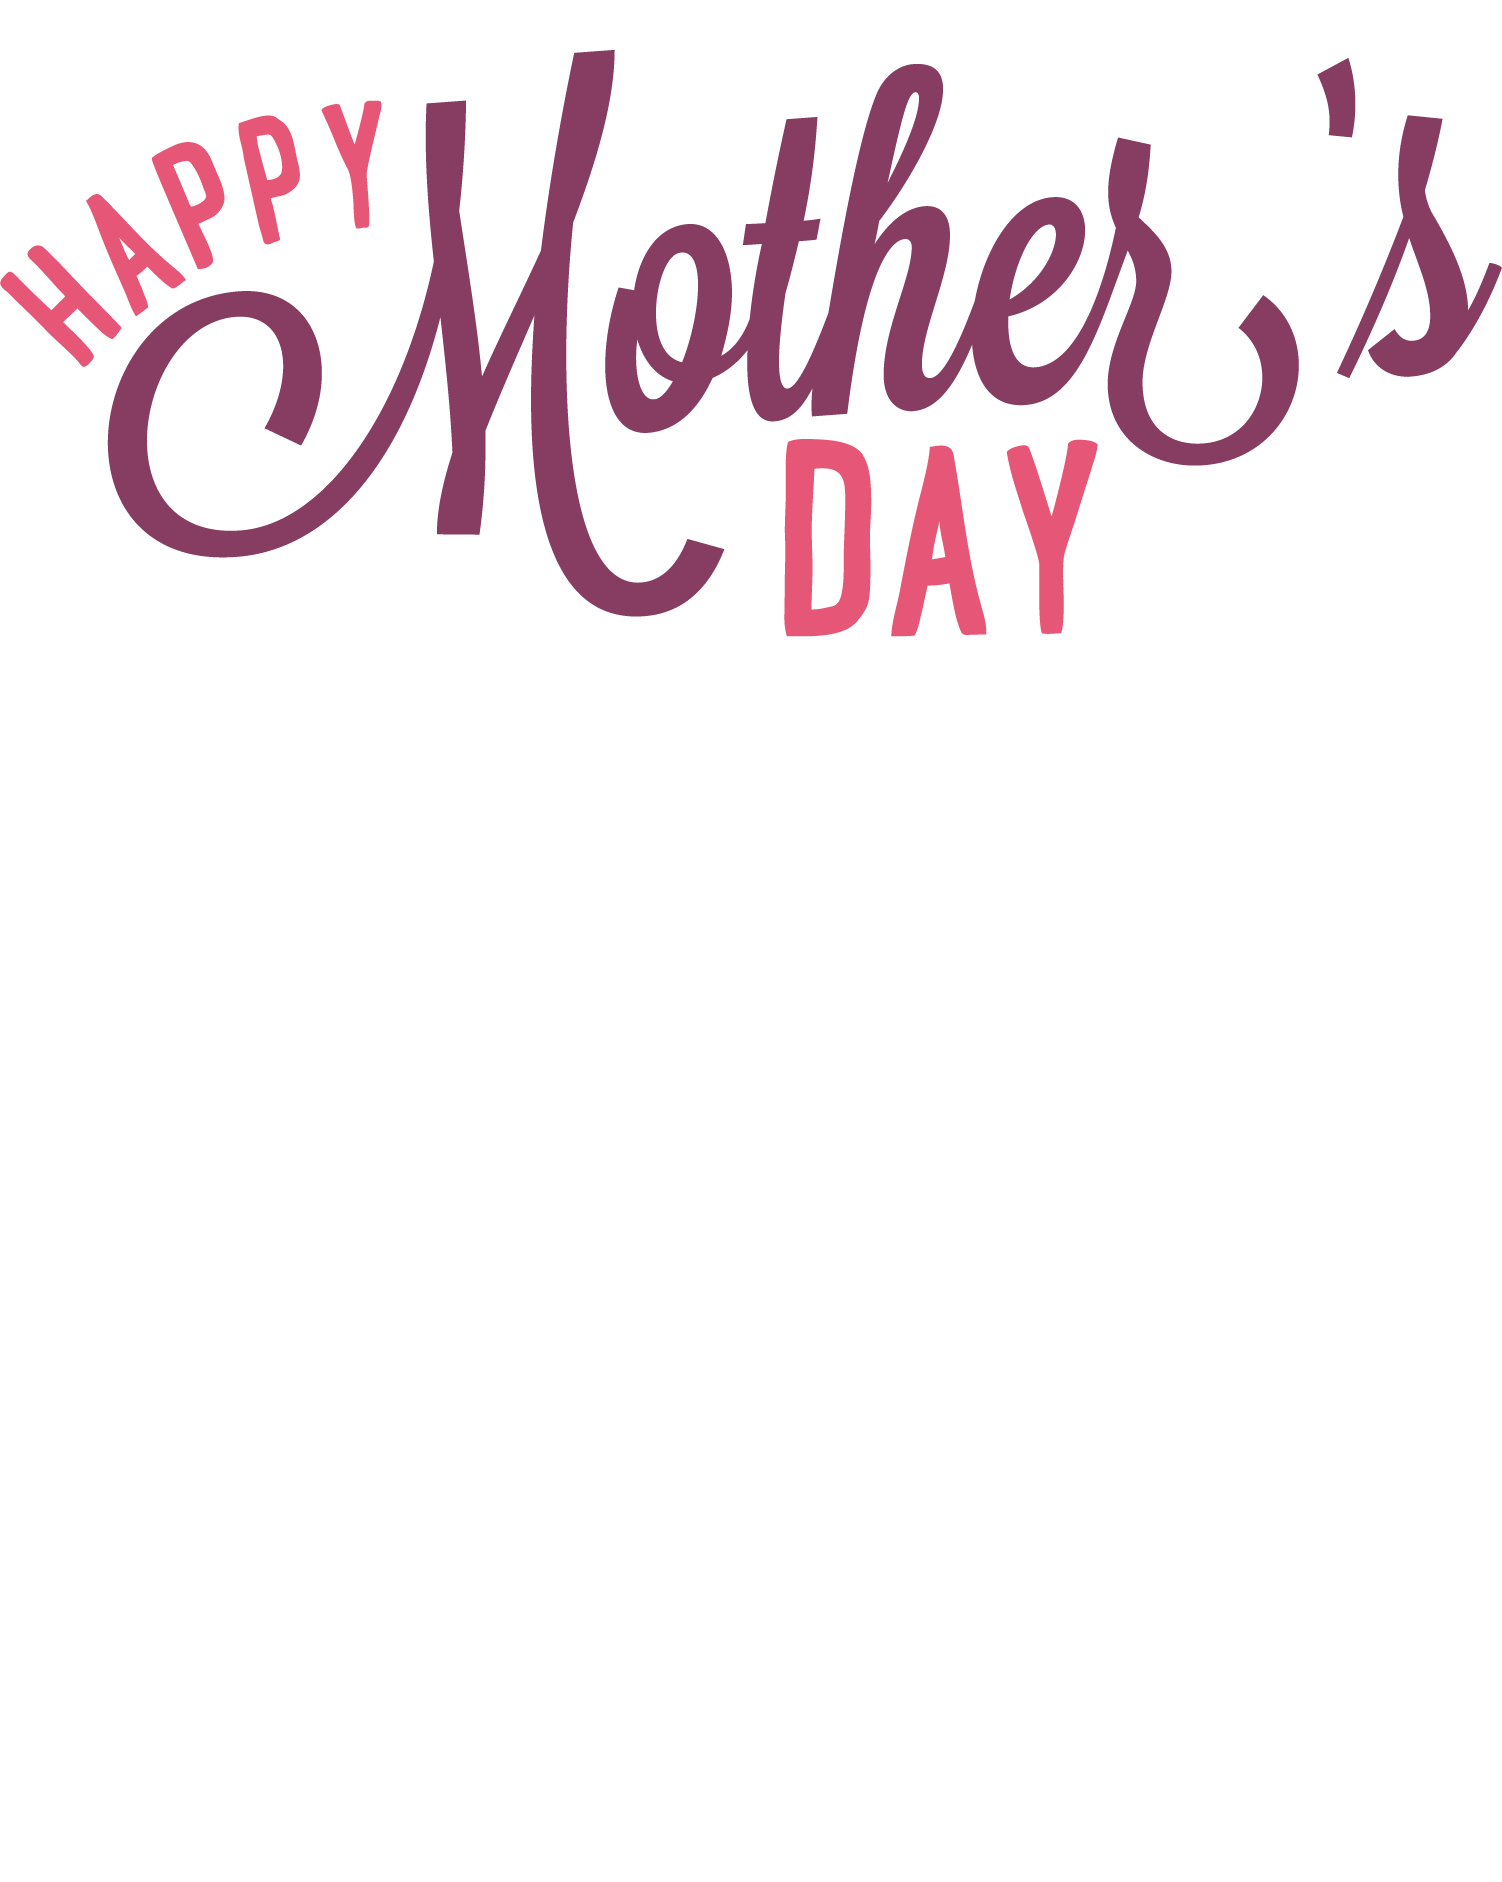 anshu kar recommends Mothers Day Gifs